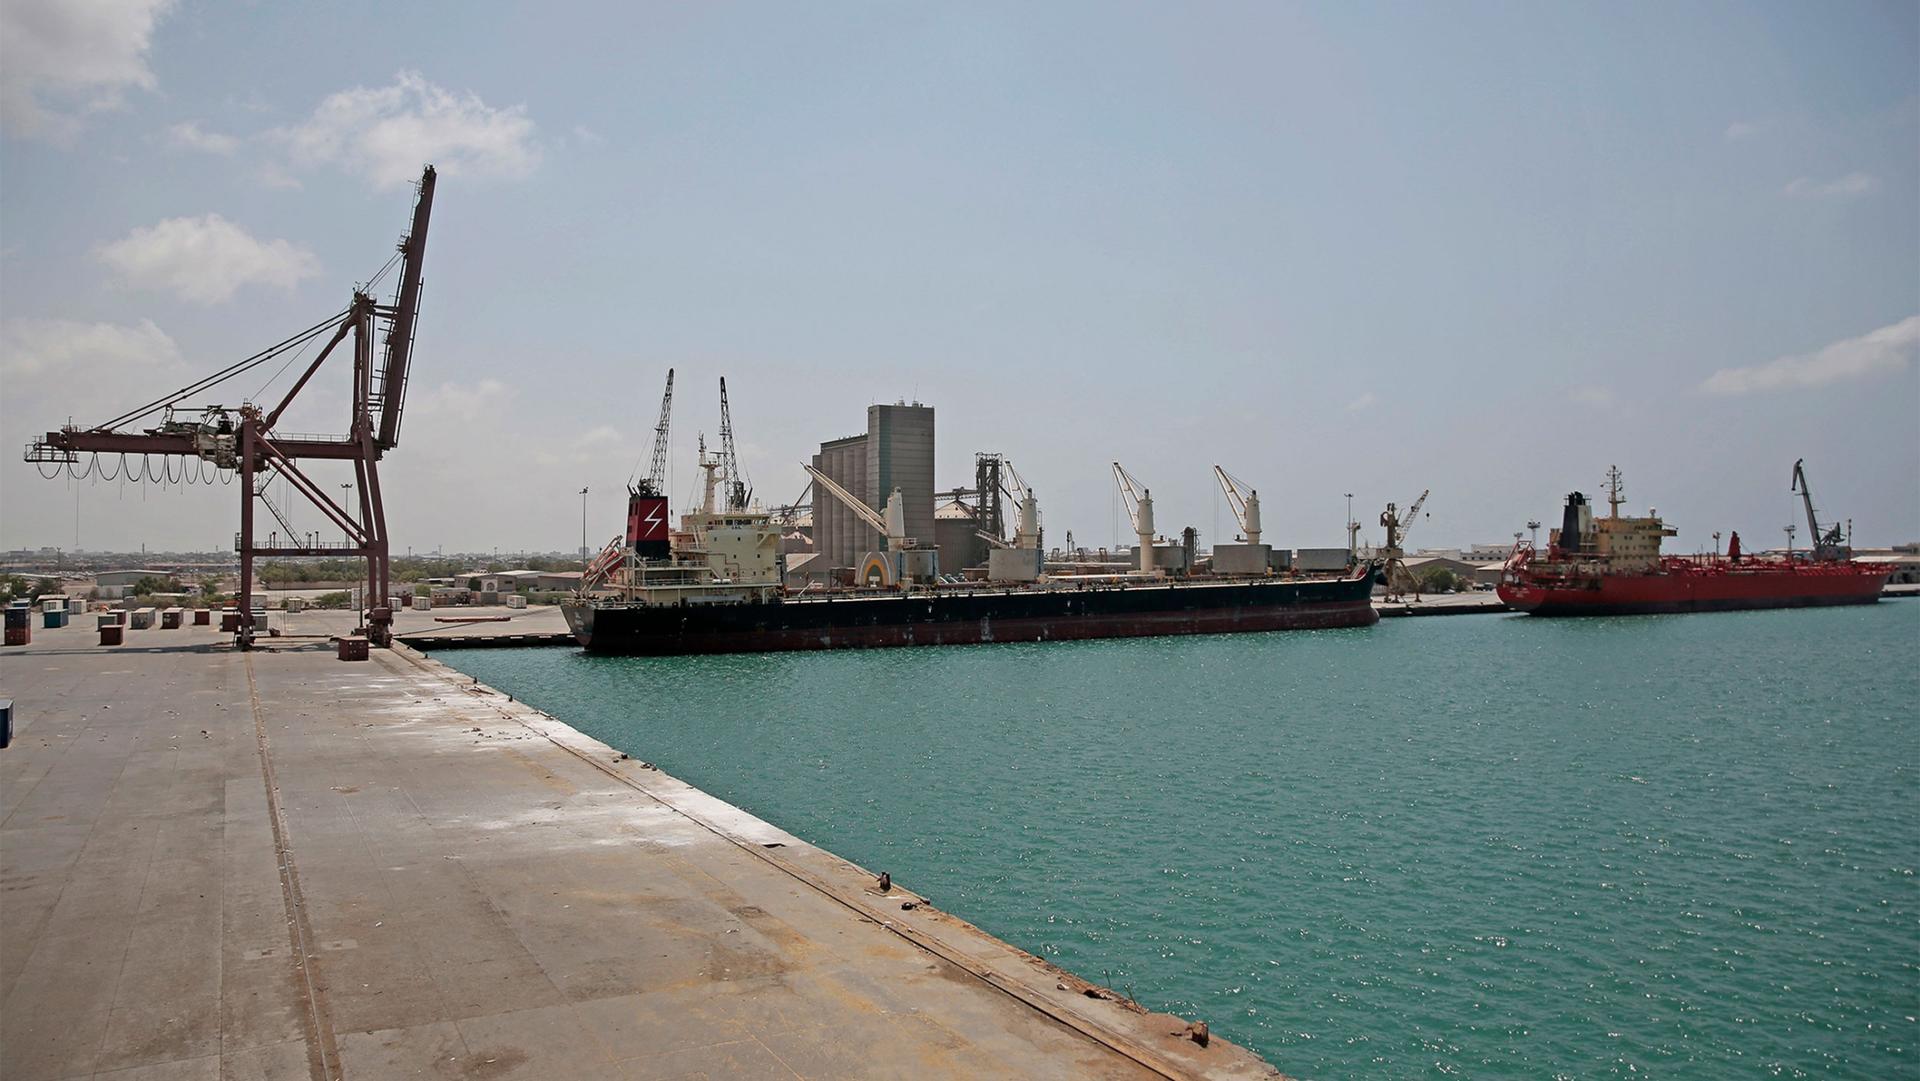 A cargo ship and oil tanker ship sit idle while docked at the port of Hodeida, Yemen